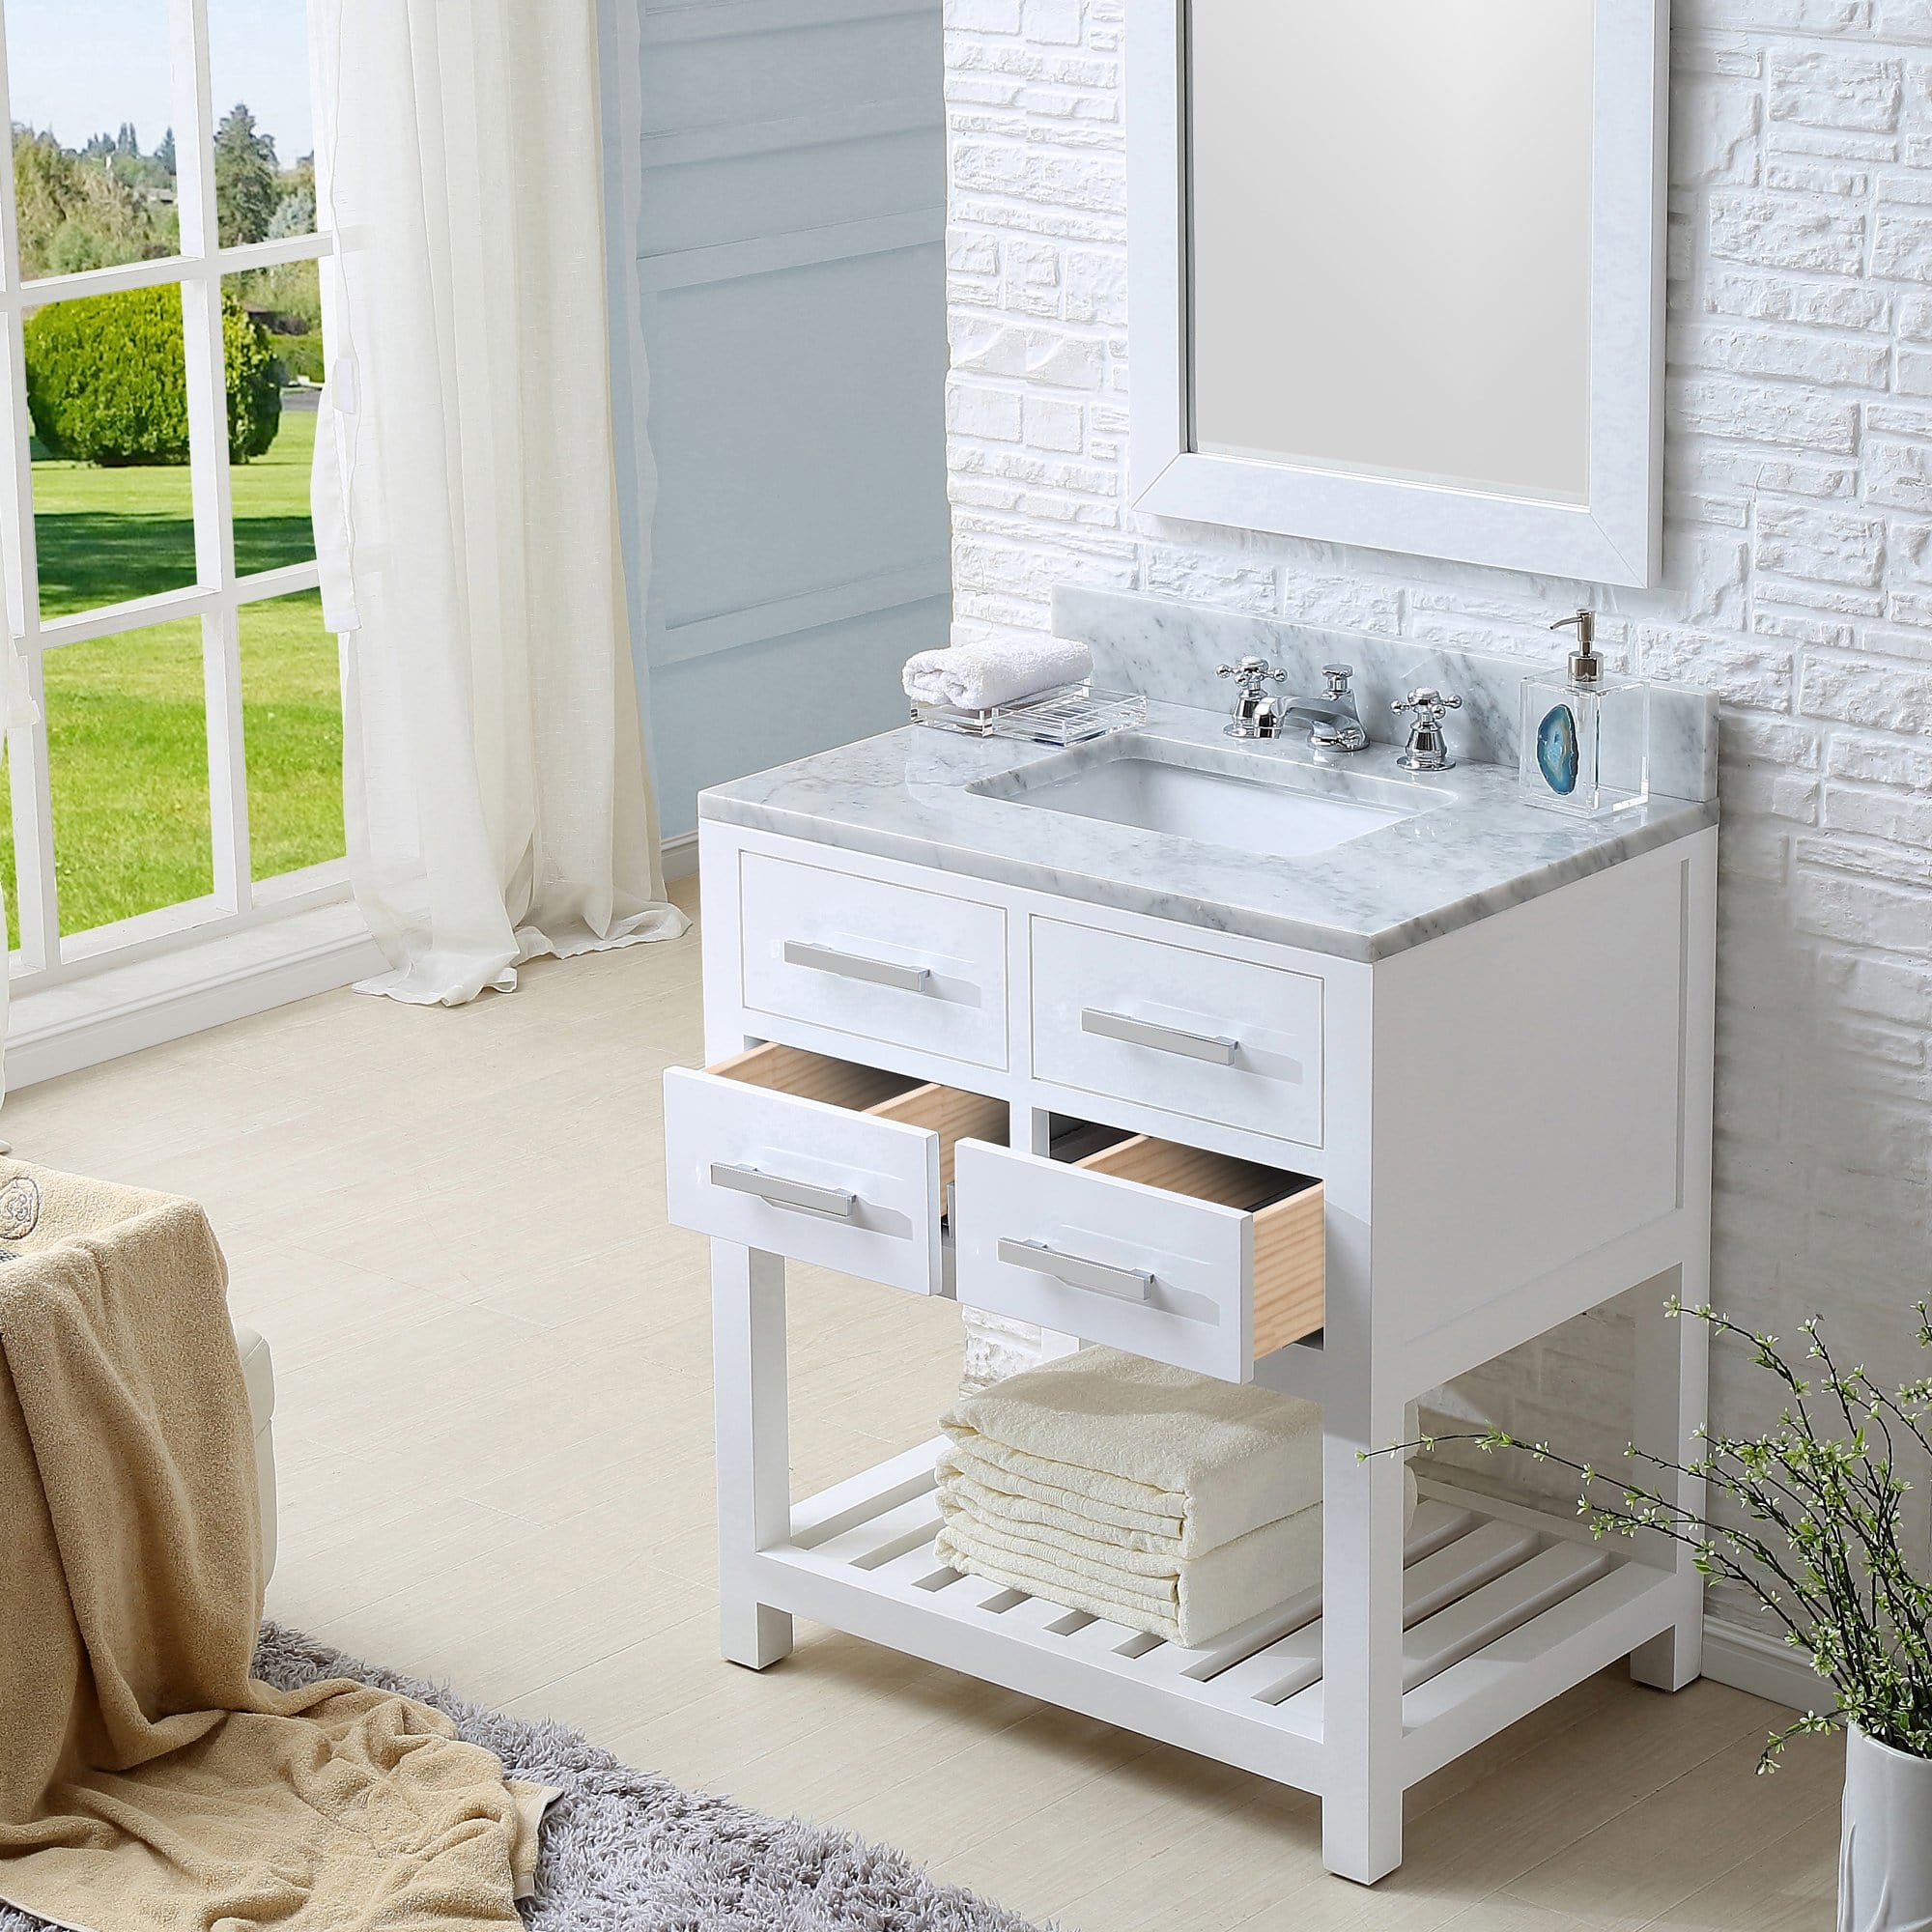 Water Creation 30 Inch Pure White Single Sink Bathroom Vanity With Matching Framed Mirror From The Madalyn Collection - Molaix700621682486Bathroom vanityMA30CW01PW-R24000000